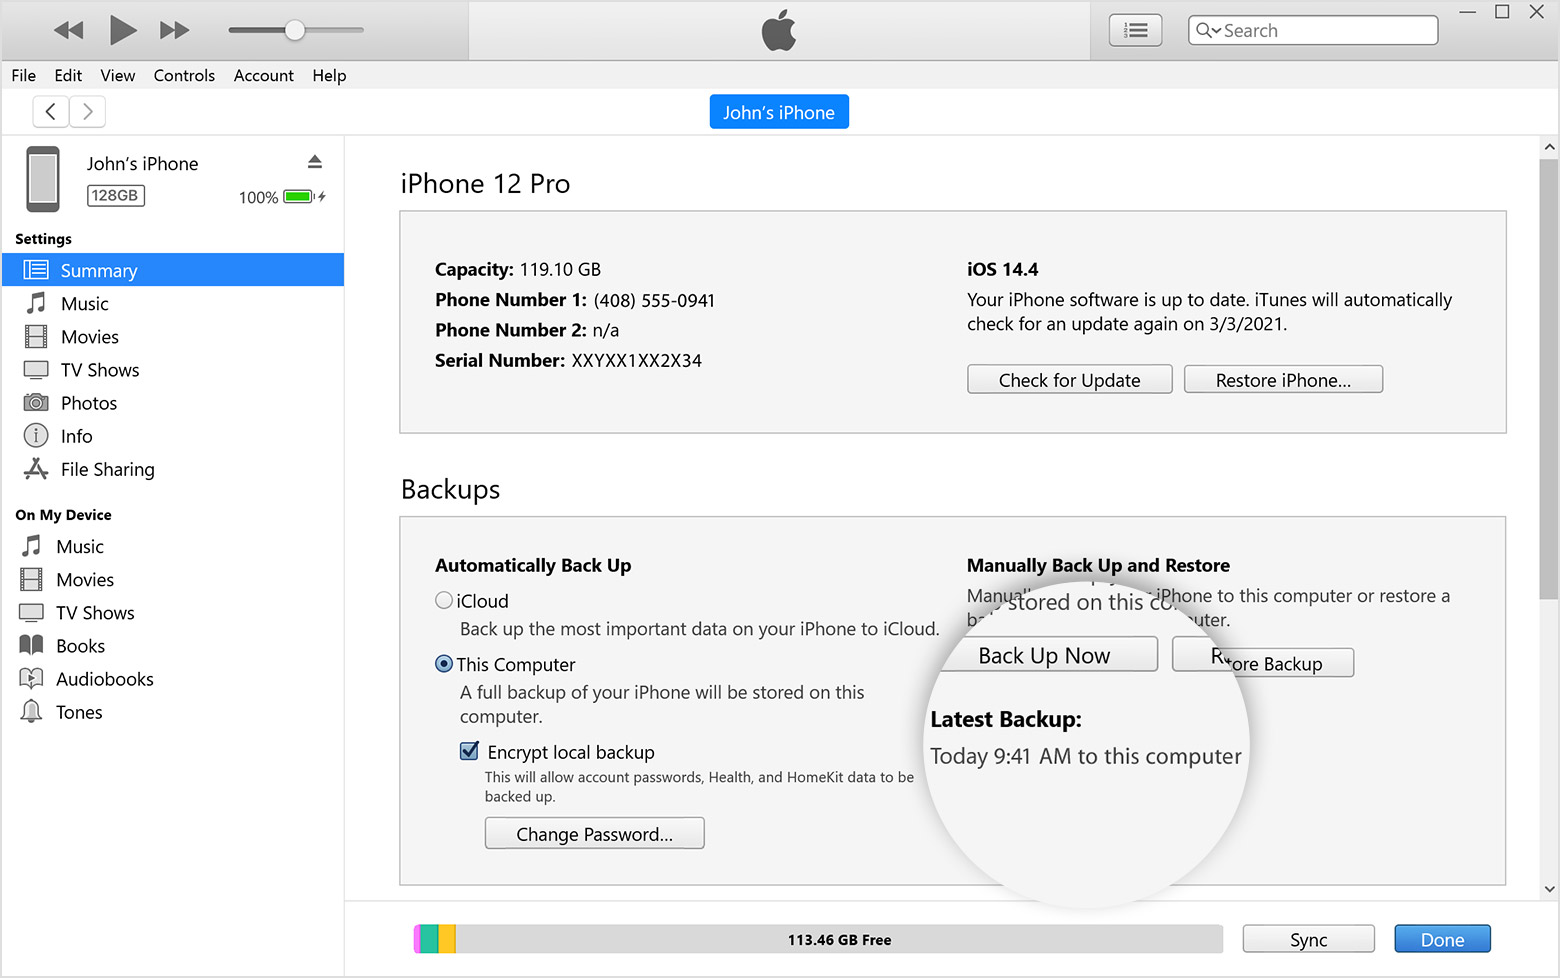 Do You Have To Use ITunes With An IPhone Or IPod?